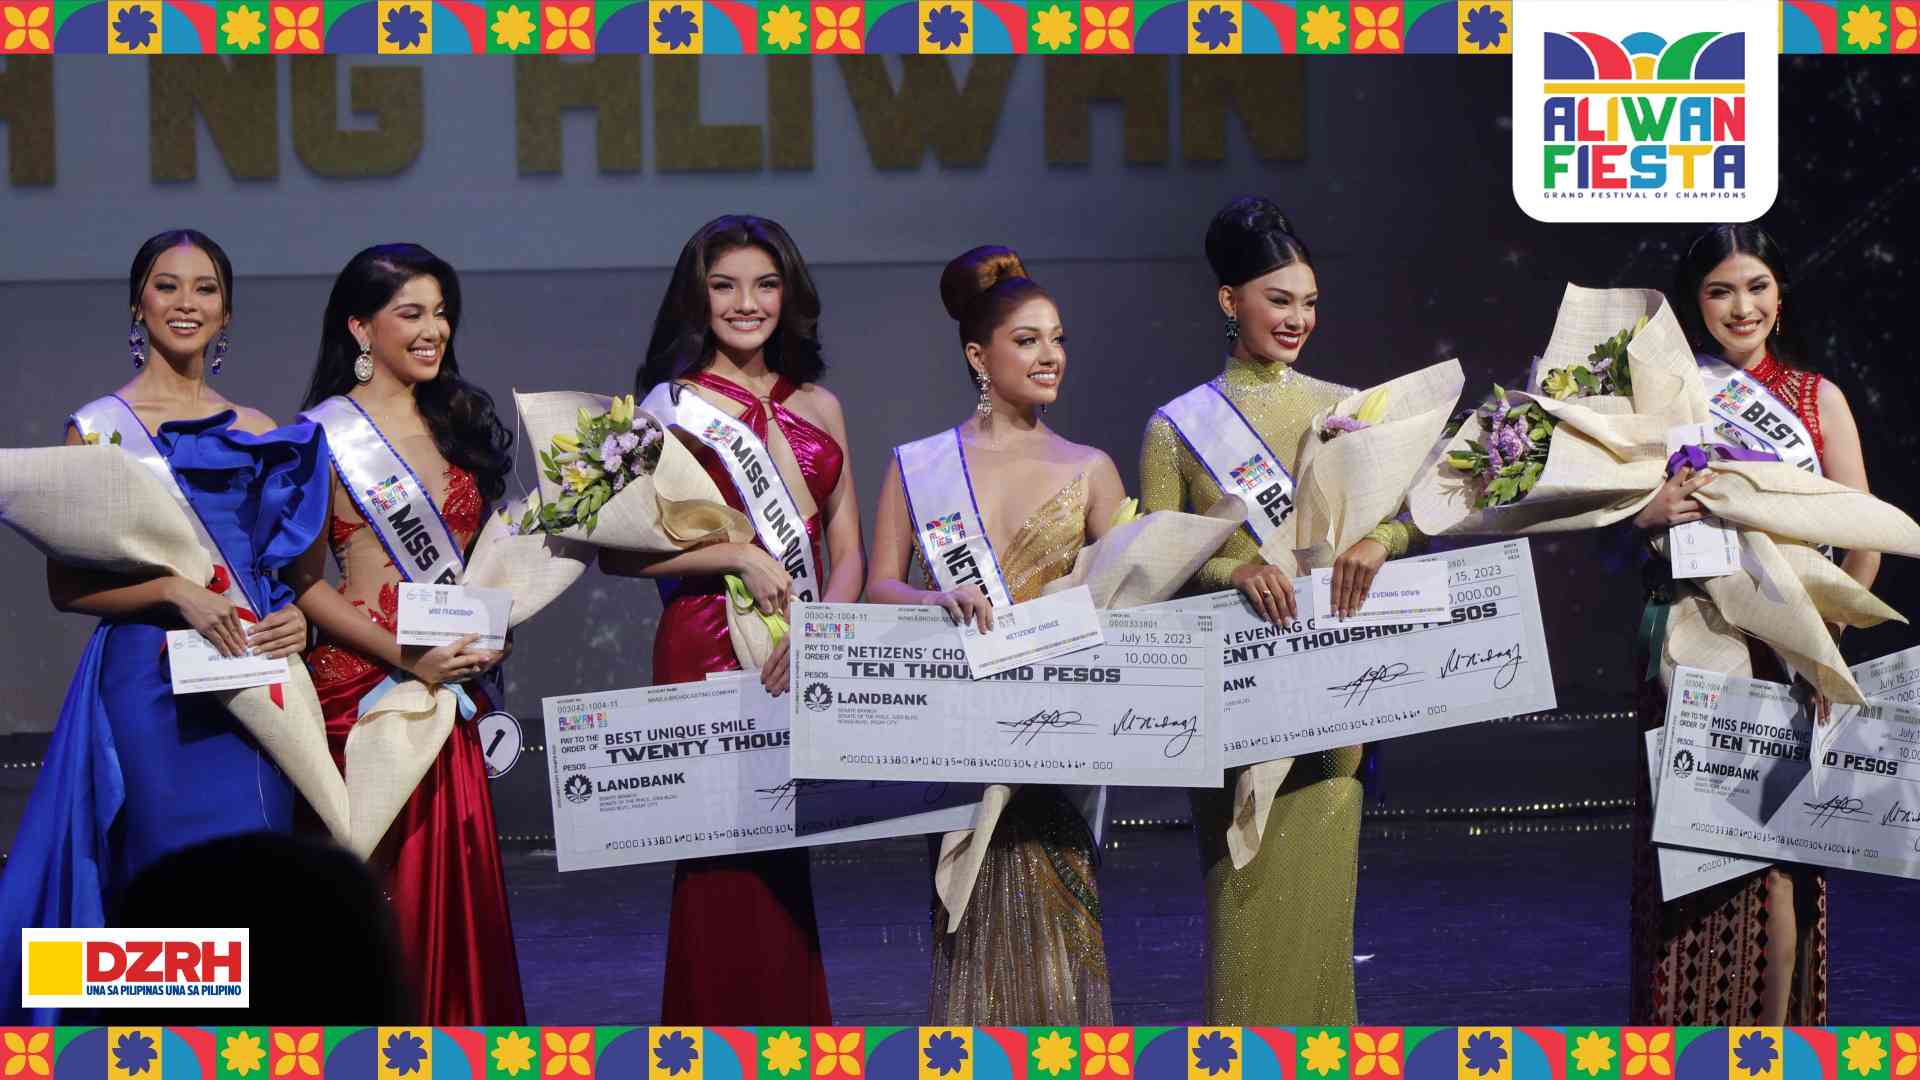 La Union's Festival Queen sweeps 4 special awards in Reyna ng Aliwan pageant night